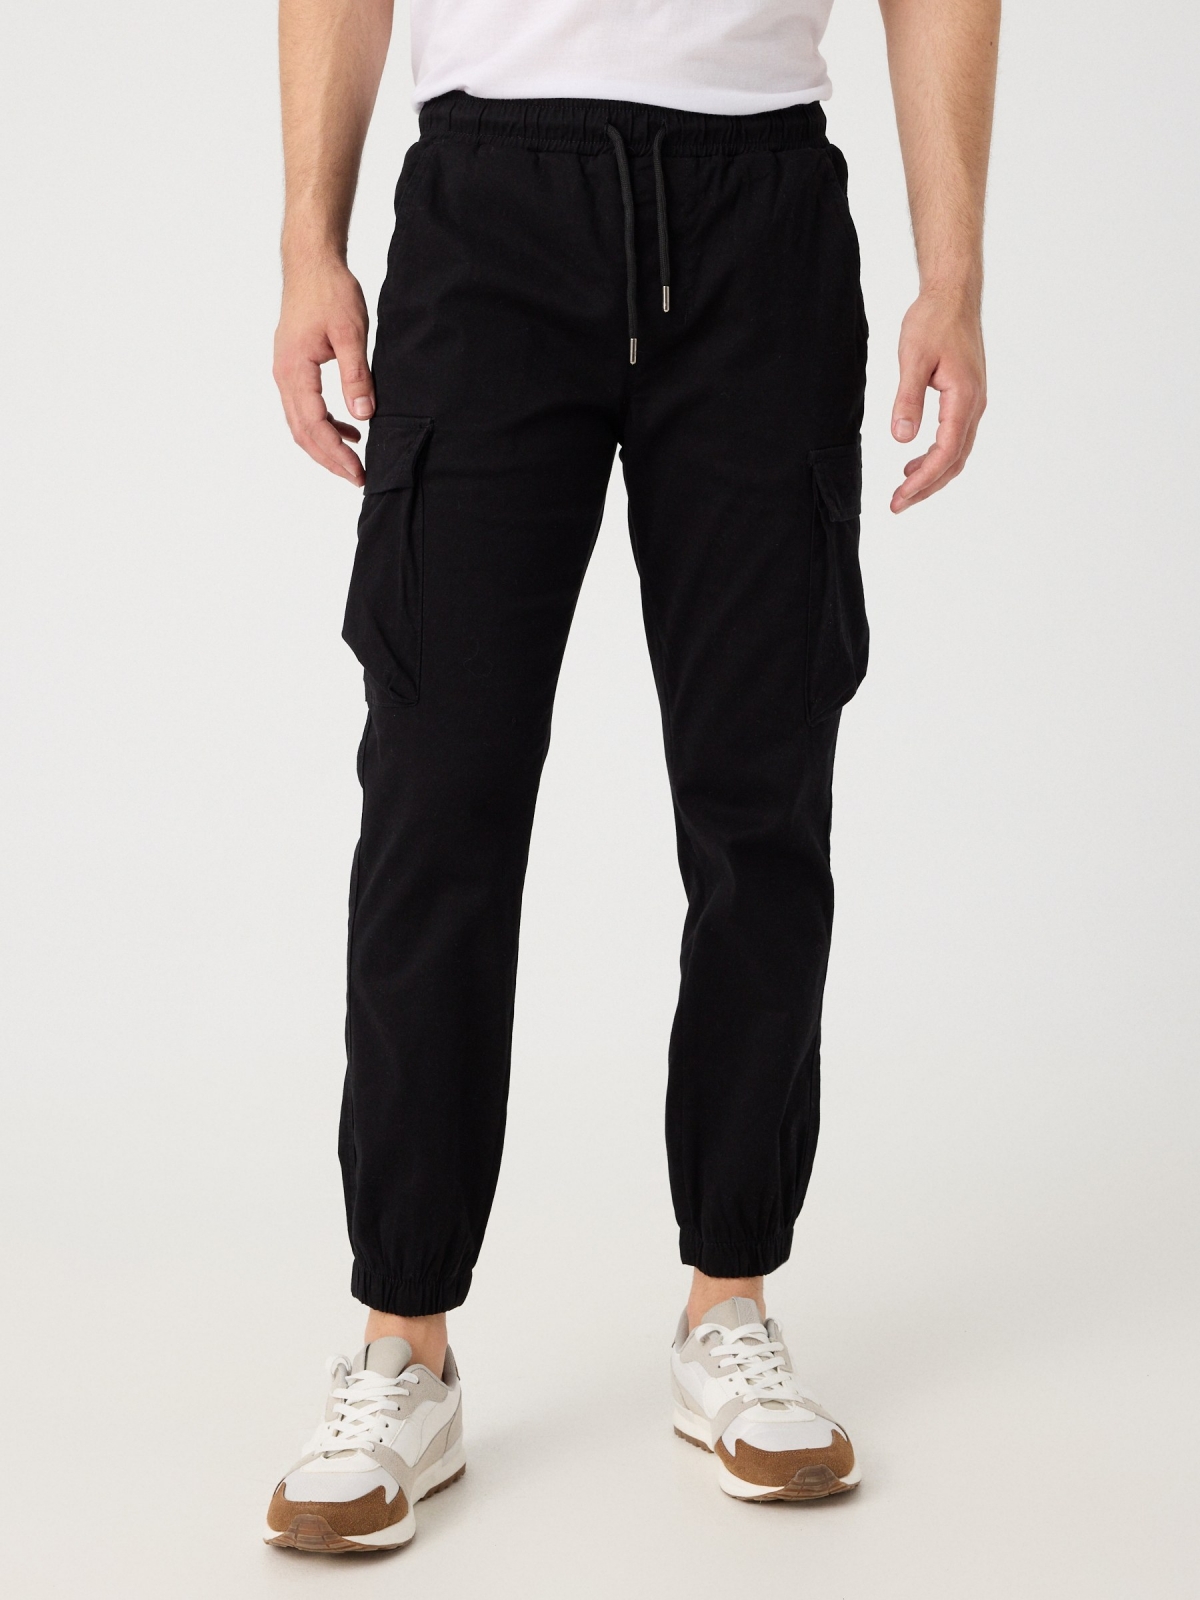 Adjustable cargo joggers black middle front view